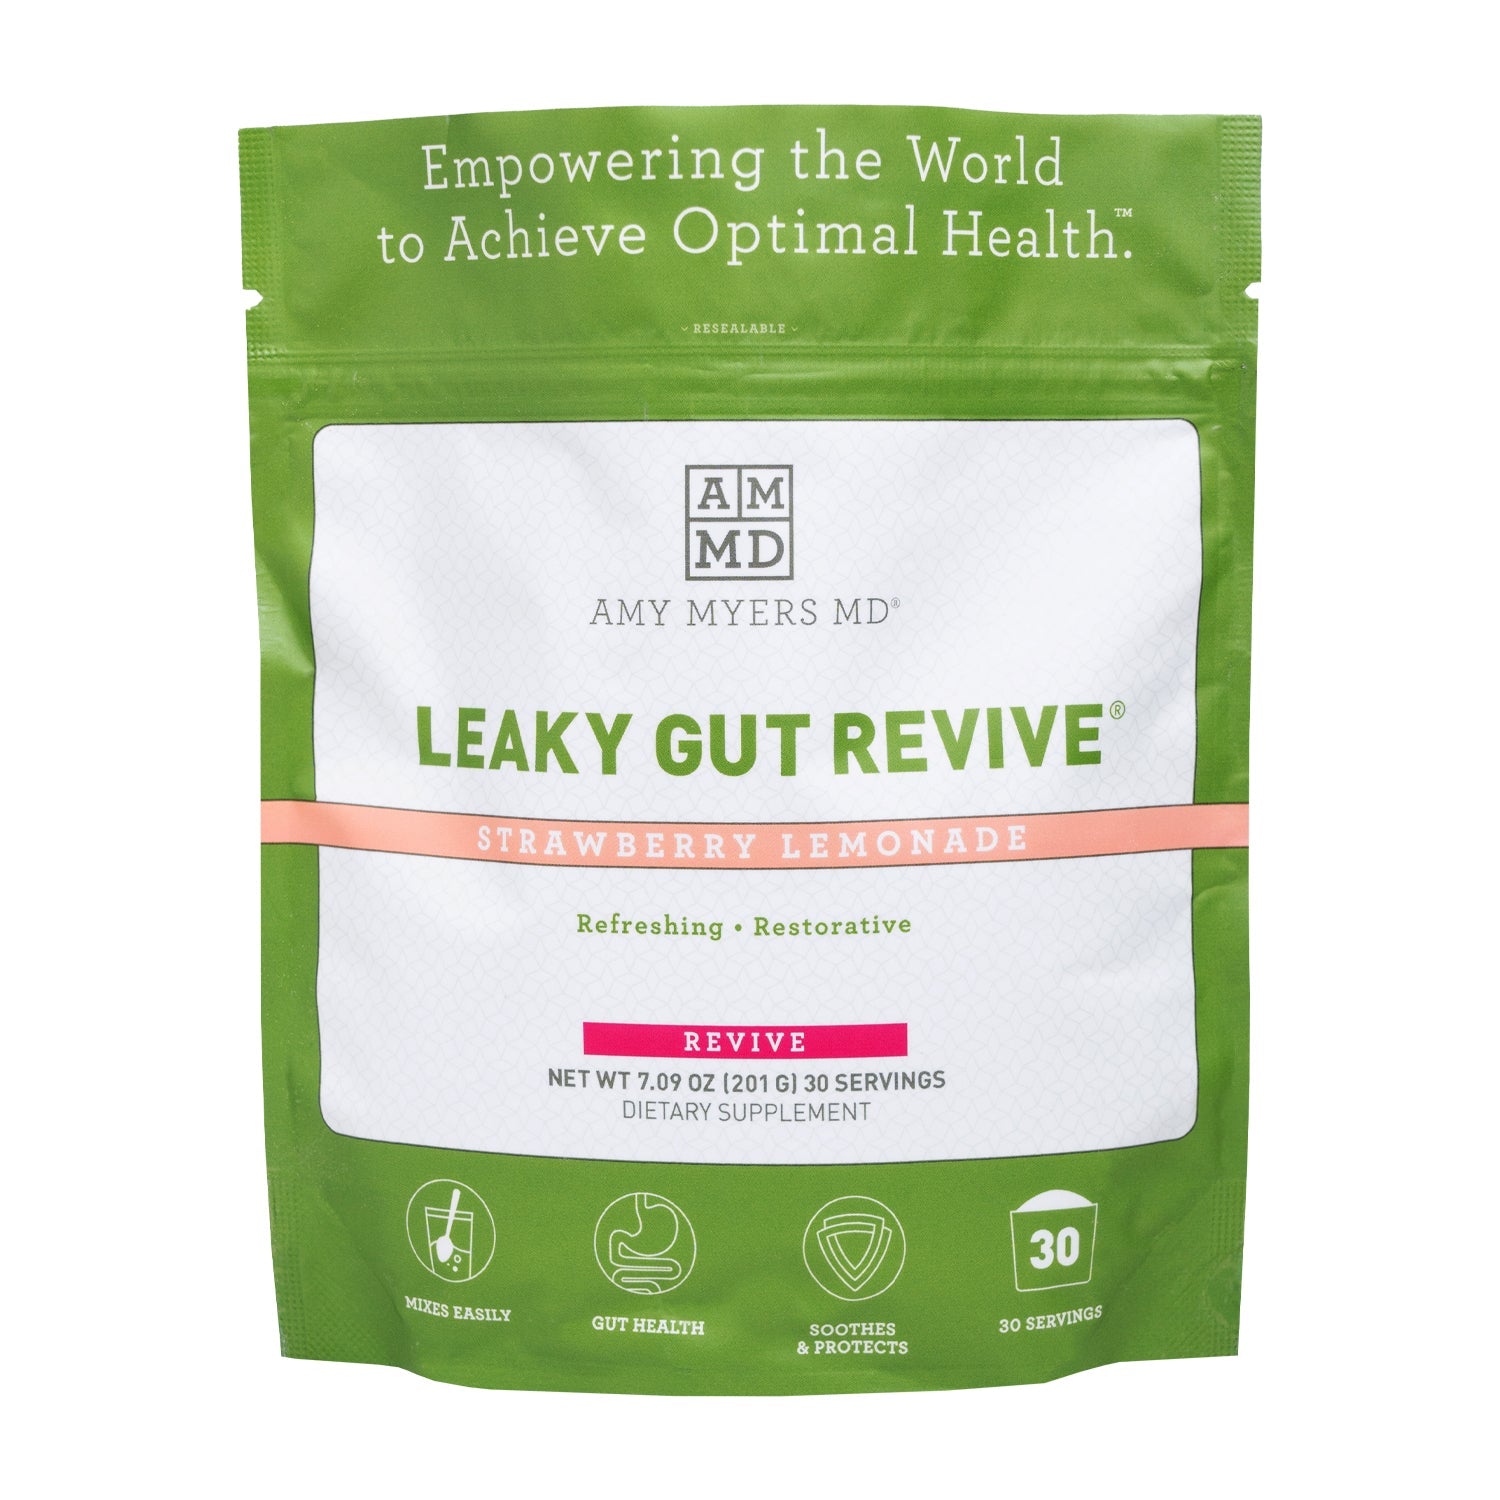 Leaky Gut Revive (Strawberry Lemonade) - 201g | Amy Myers MD